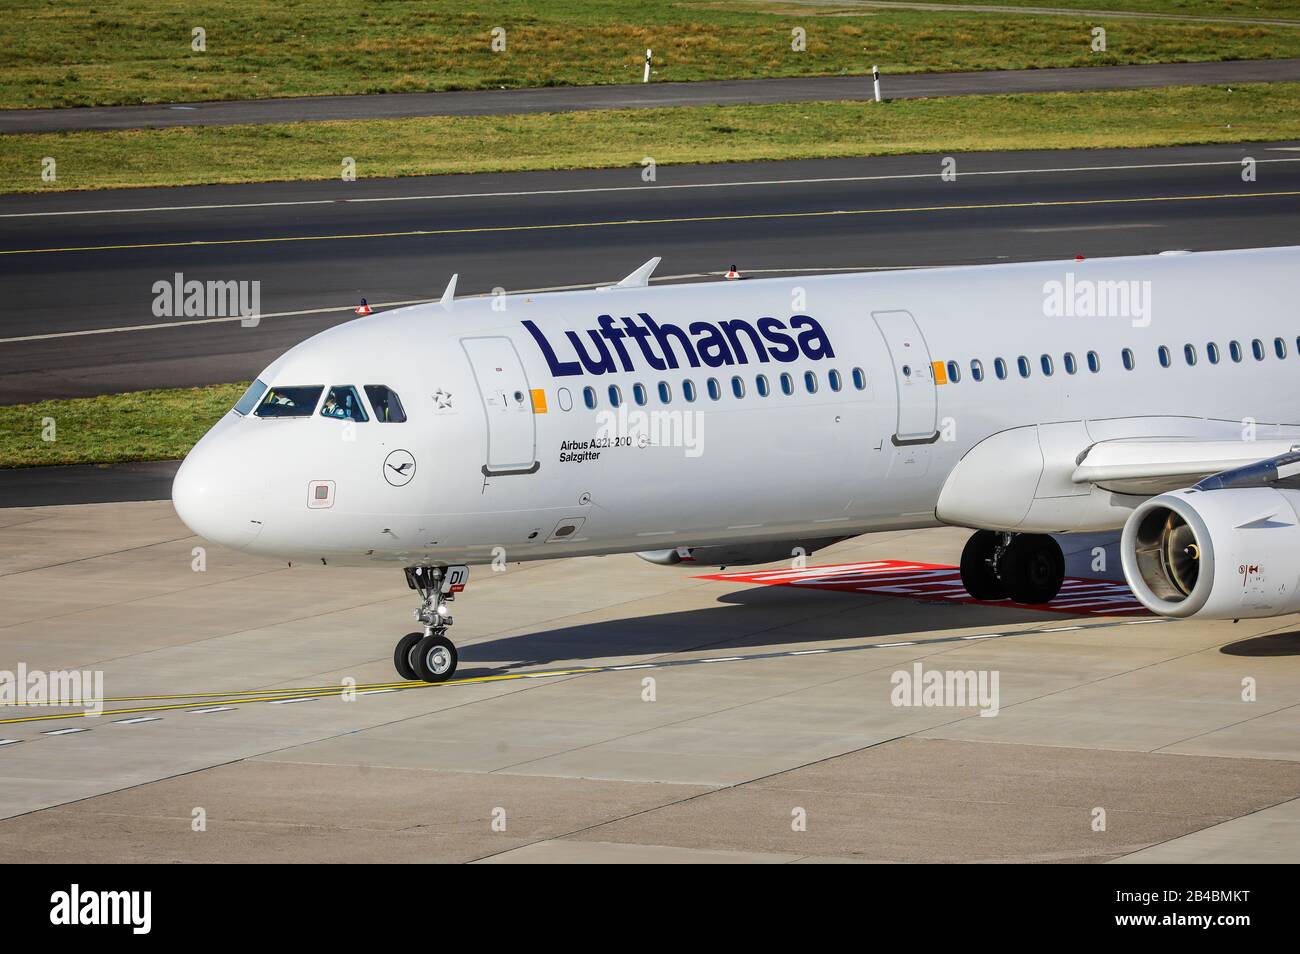 Duesseldorf, North Rhine-Westphalia, Germany - Lufthansa, Airbus A321-231  aircraft waiting for take-off at Duesseldorf International Airport, D-AIDI  Stock Photo - Alamy